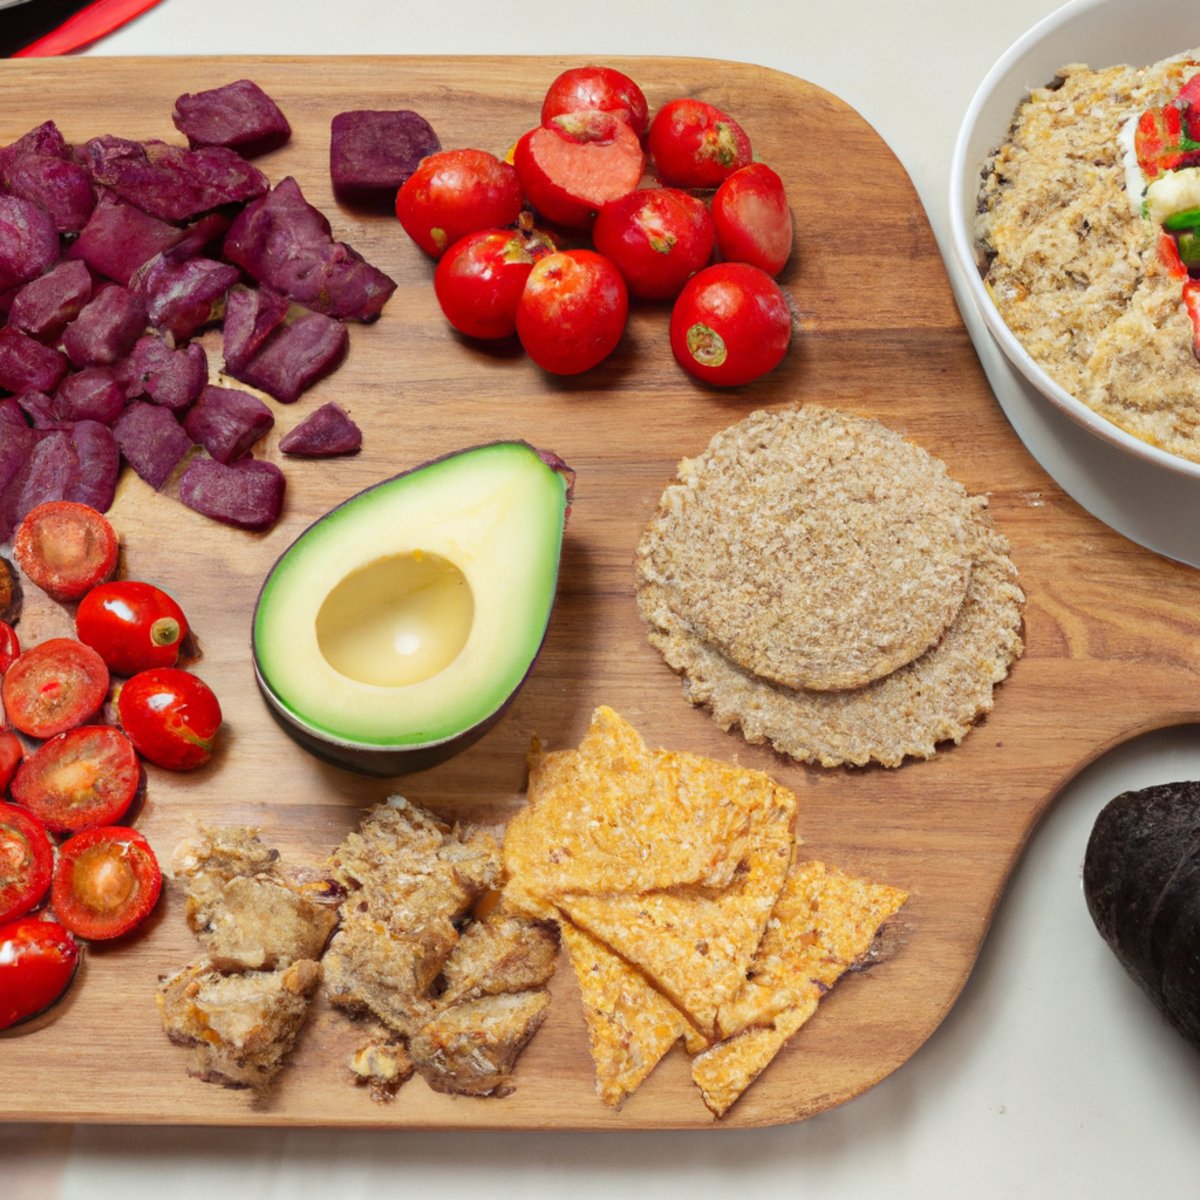 The photo features a wooden cutting board with an assortment of gluten-free foods arranged in an aesthetically pleasing manner. In the center of the board is a pile of quinoa, surrounded by sliced avocado, cherry tomatoes, and diced red onion. To the left of the quinoa is a small bowl of hummus with a few gluten-free crackers arranged around it. On the right side of the board, there is a plate of grilled chicken breast with a side of roasted sweet potatoes and green beans. The colors of the foods are vibrant and inviting, making the viewer eager to try these delicious and healthy gluten-free options.